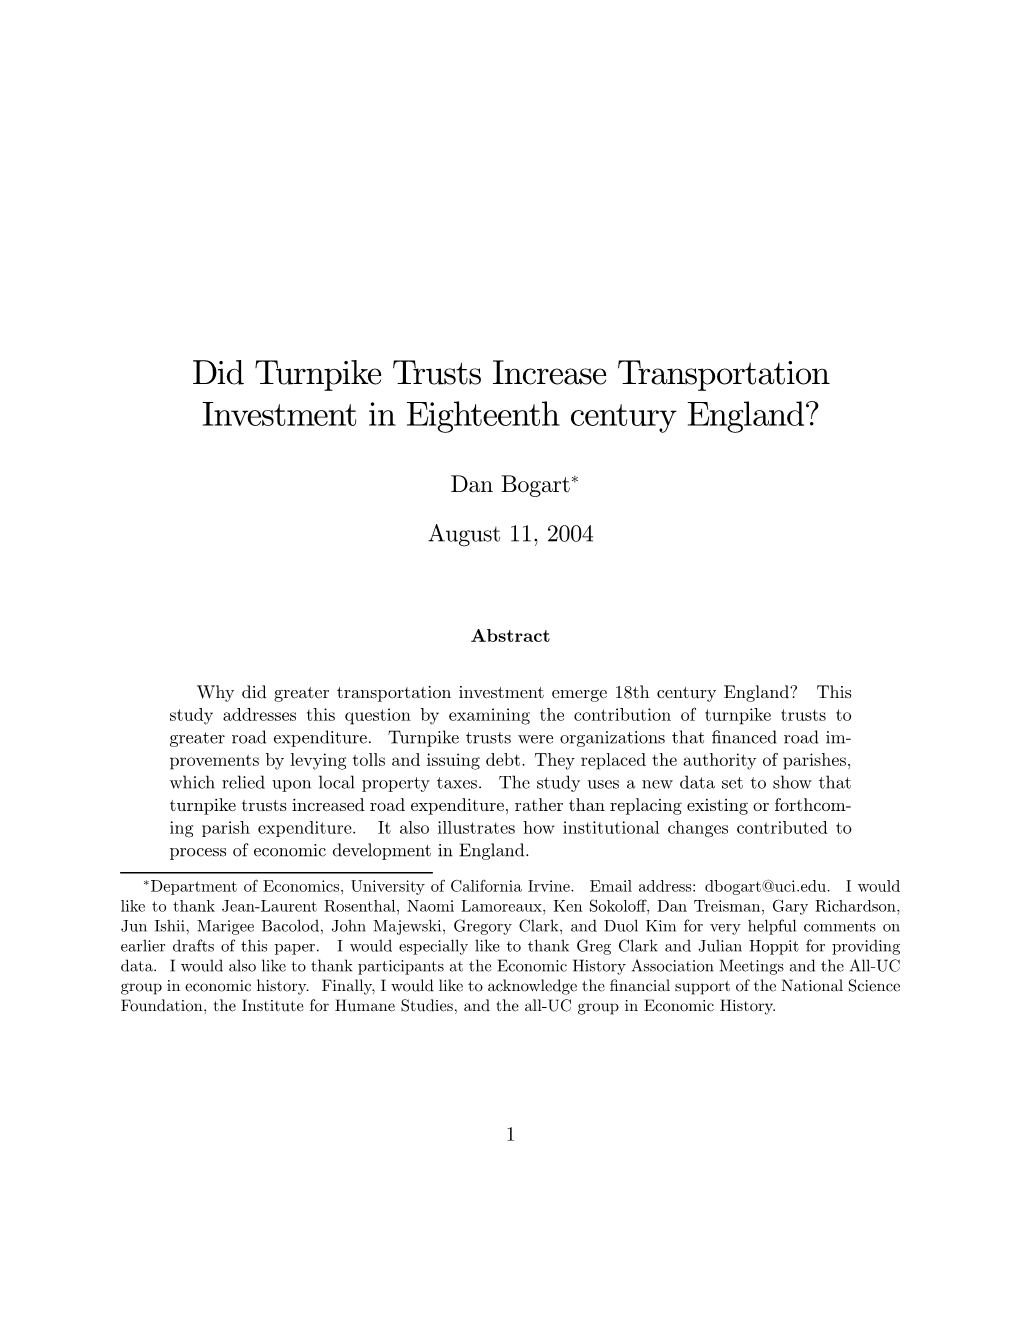 Did Turnpike Trusts Increase Transportation Investment in Eighteenth Century England?